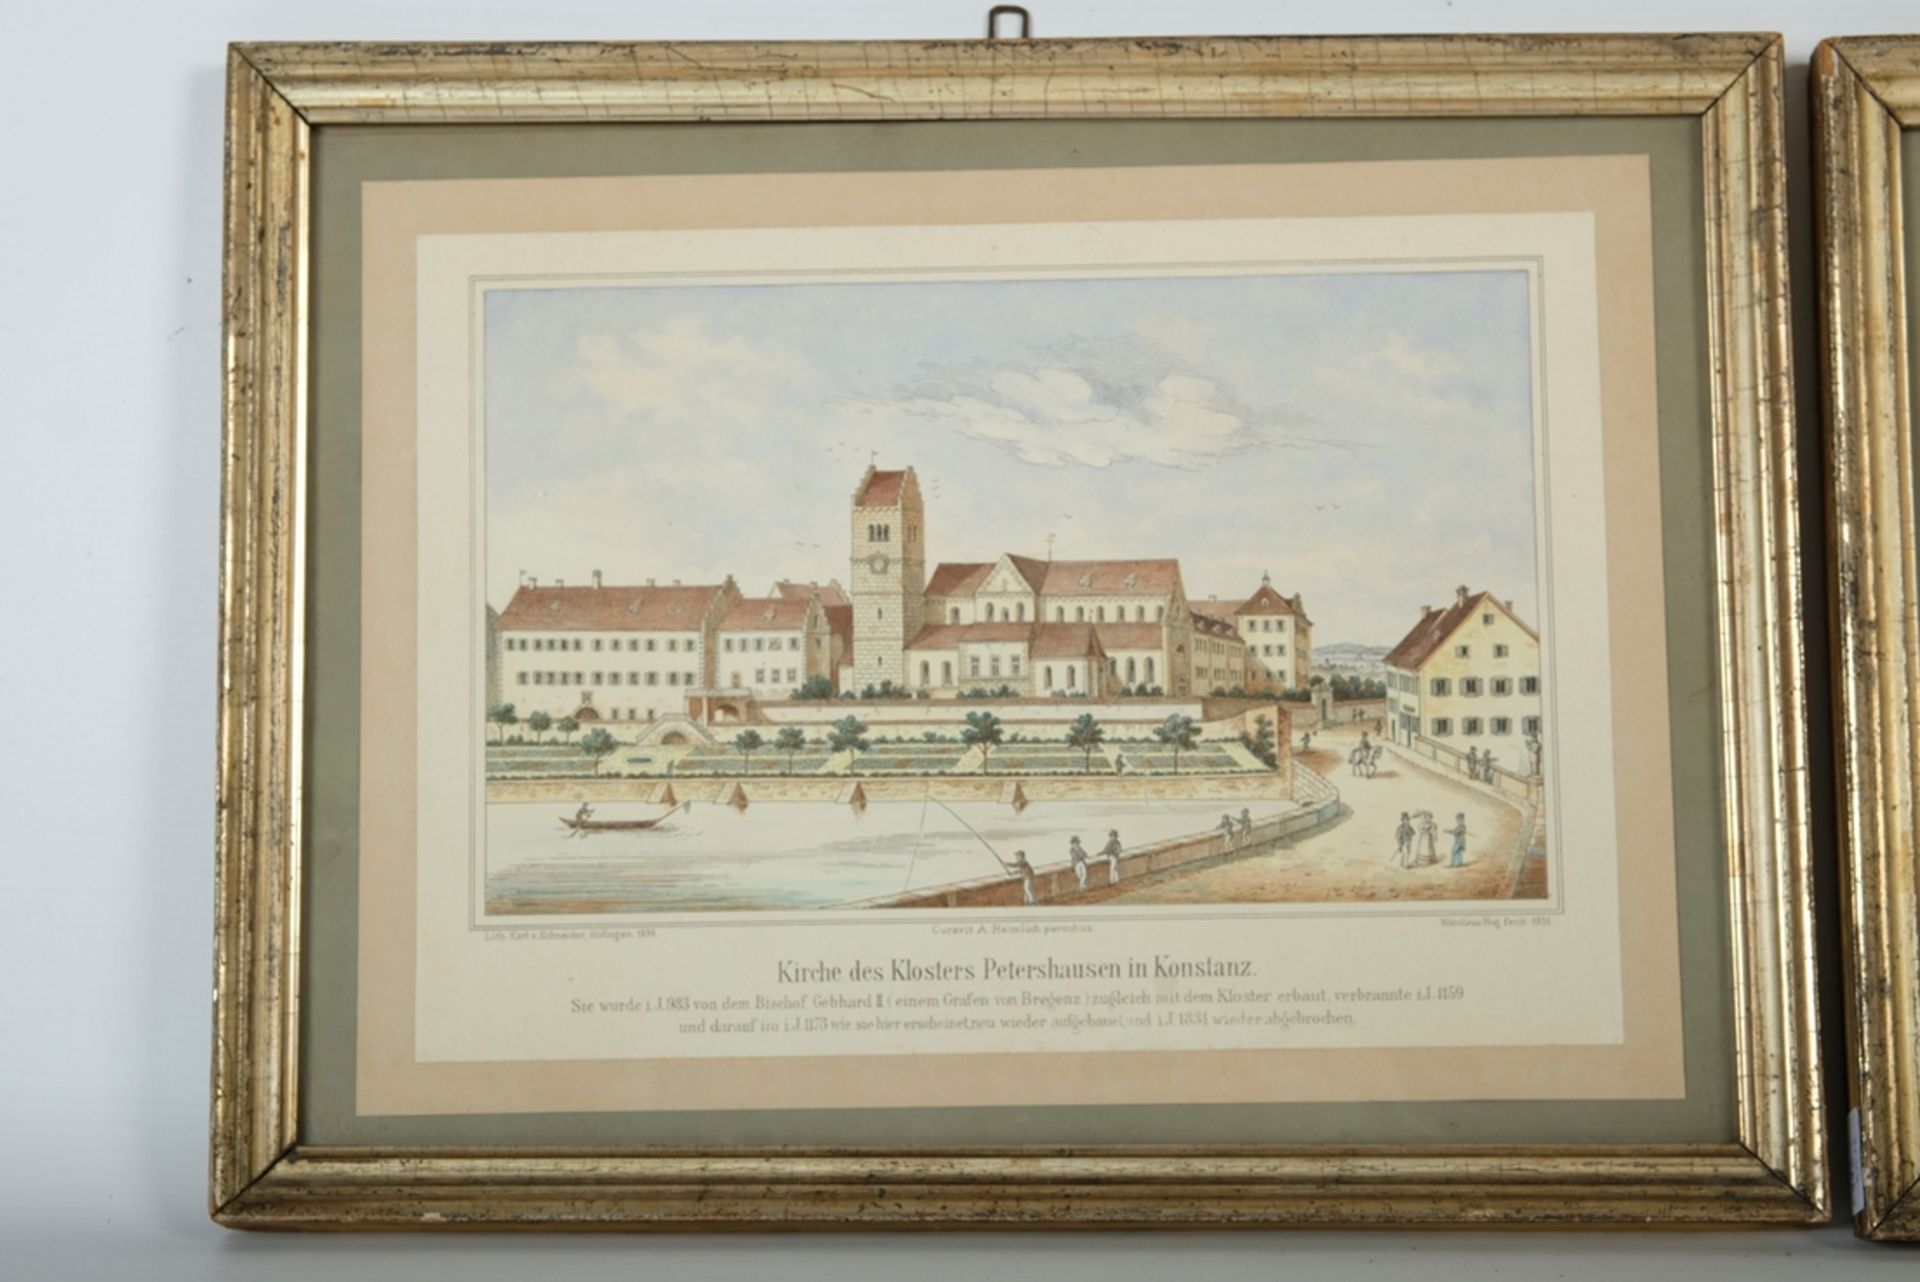 "Kirche des Klostershausen in Konstanz", 1898, lithograph. Inscribed at the bottom: "Lith. Karl v.  - Image 2 of 3